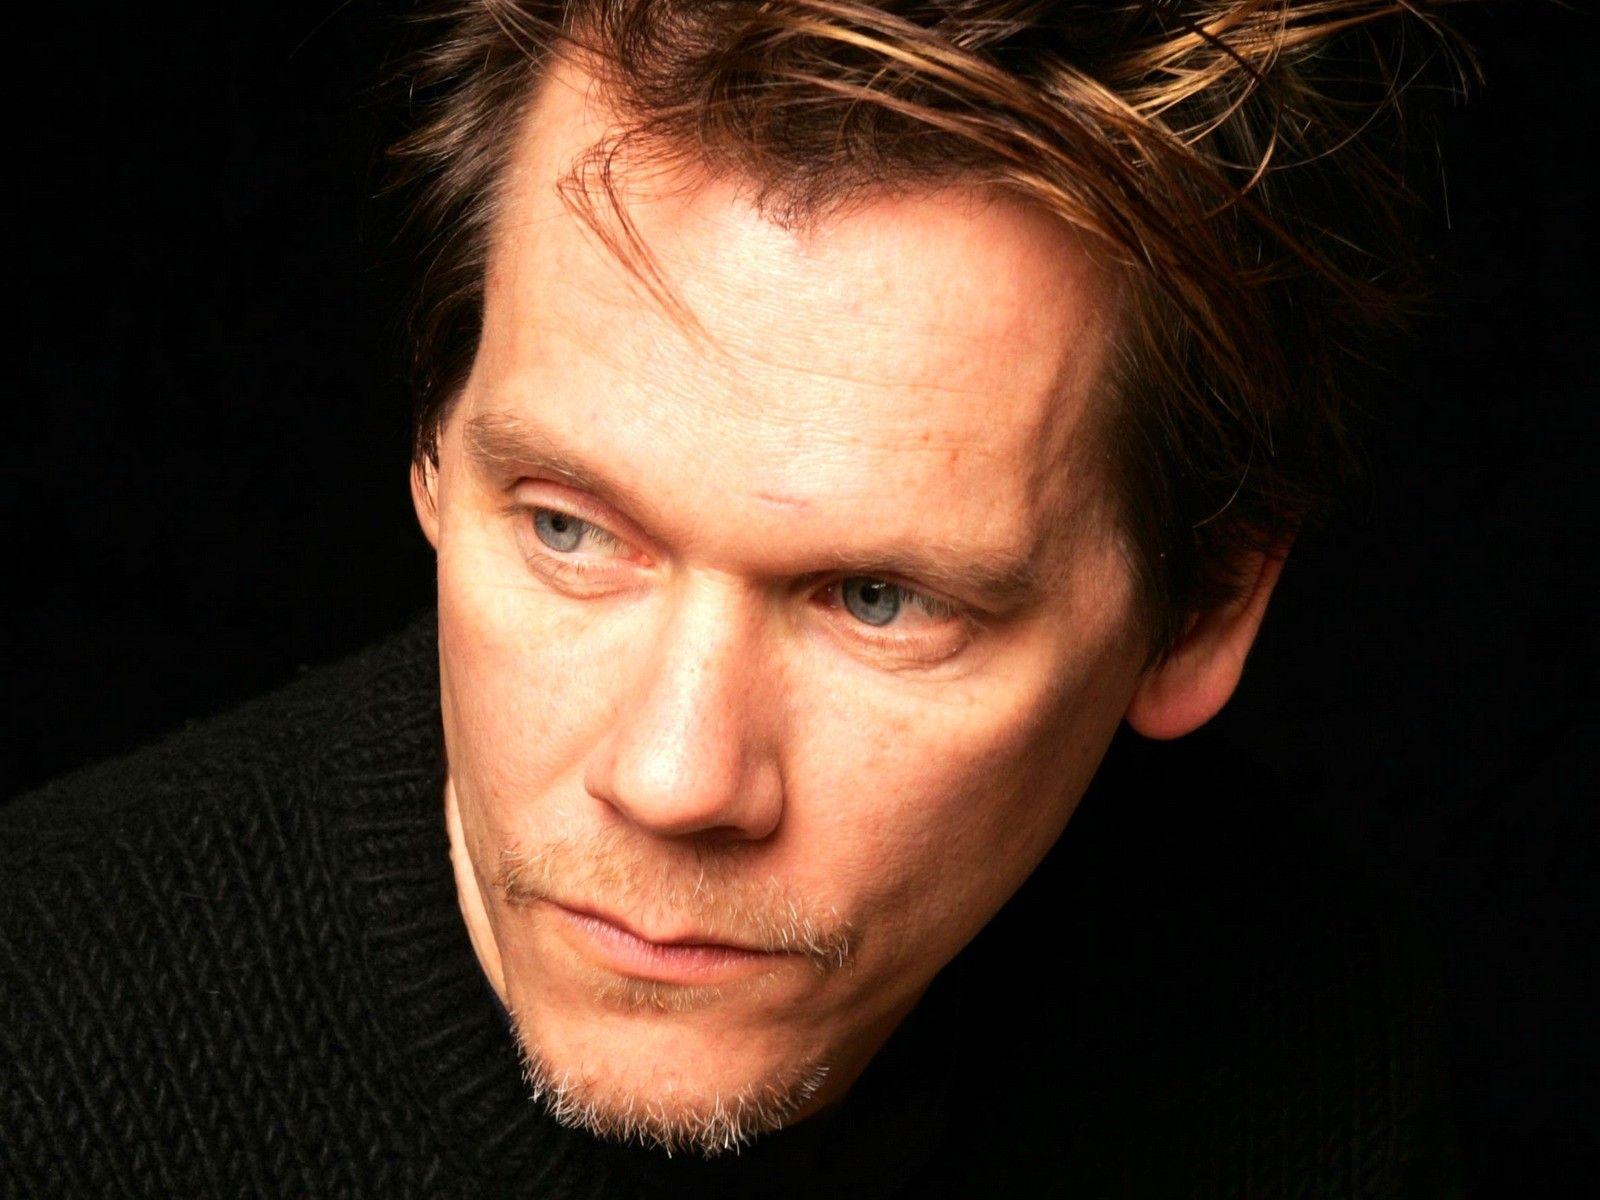 Kevin Bacon Face Wallpaper 53751 1600x1200 px